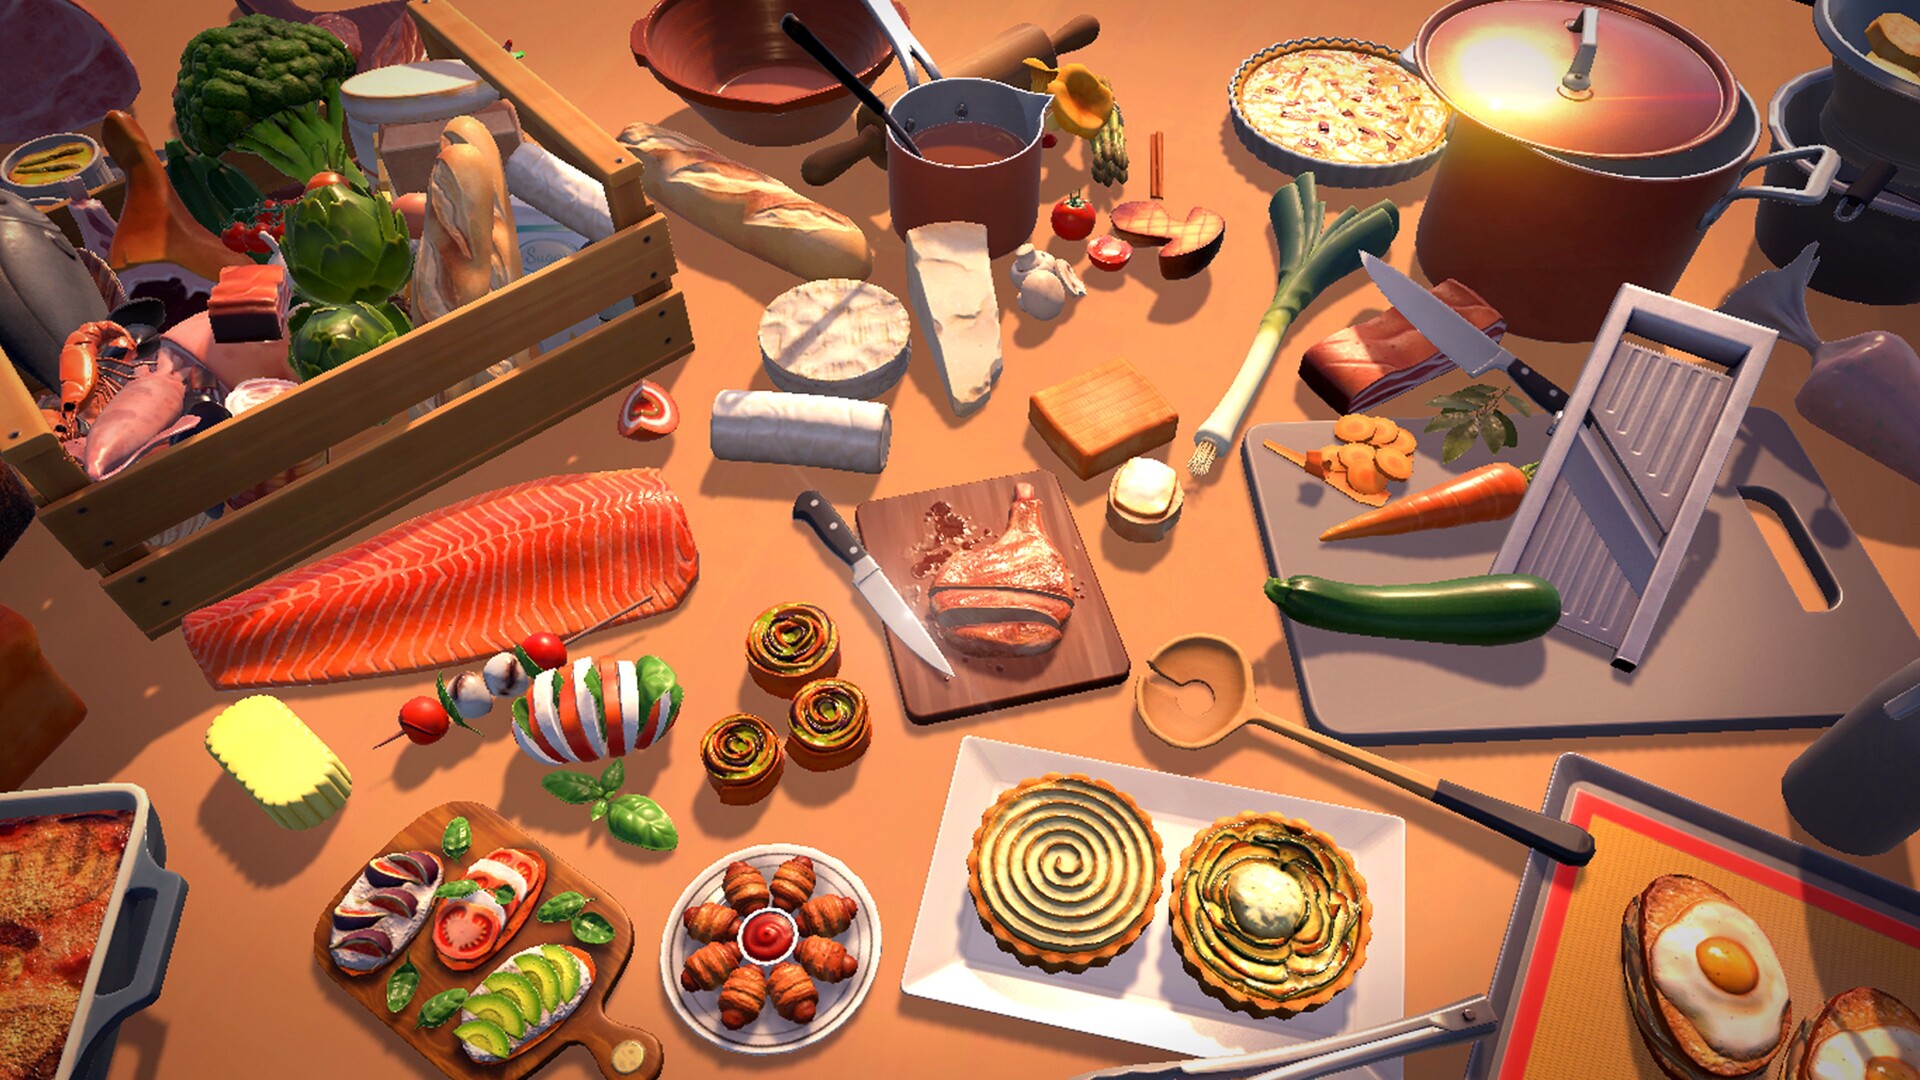 Chef Life A Restaurant Simulator PC Game Latest Version Free Download